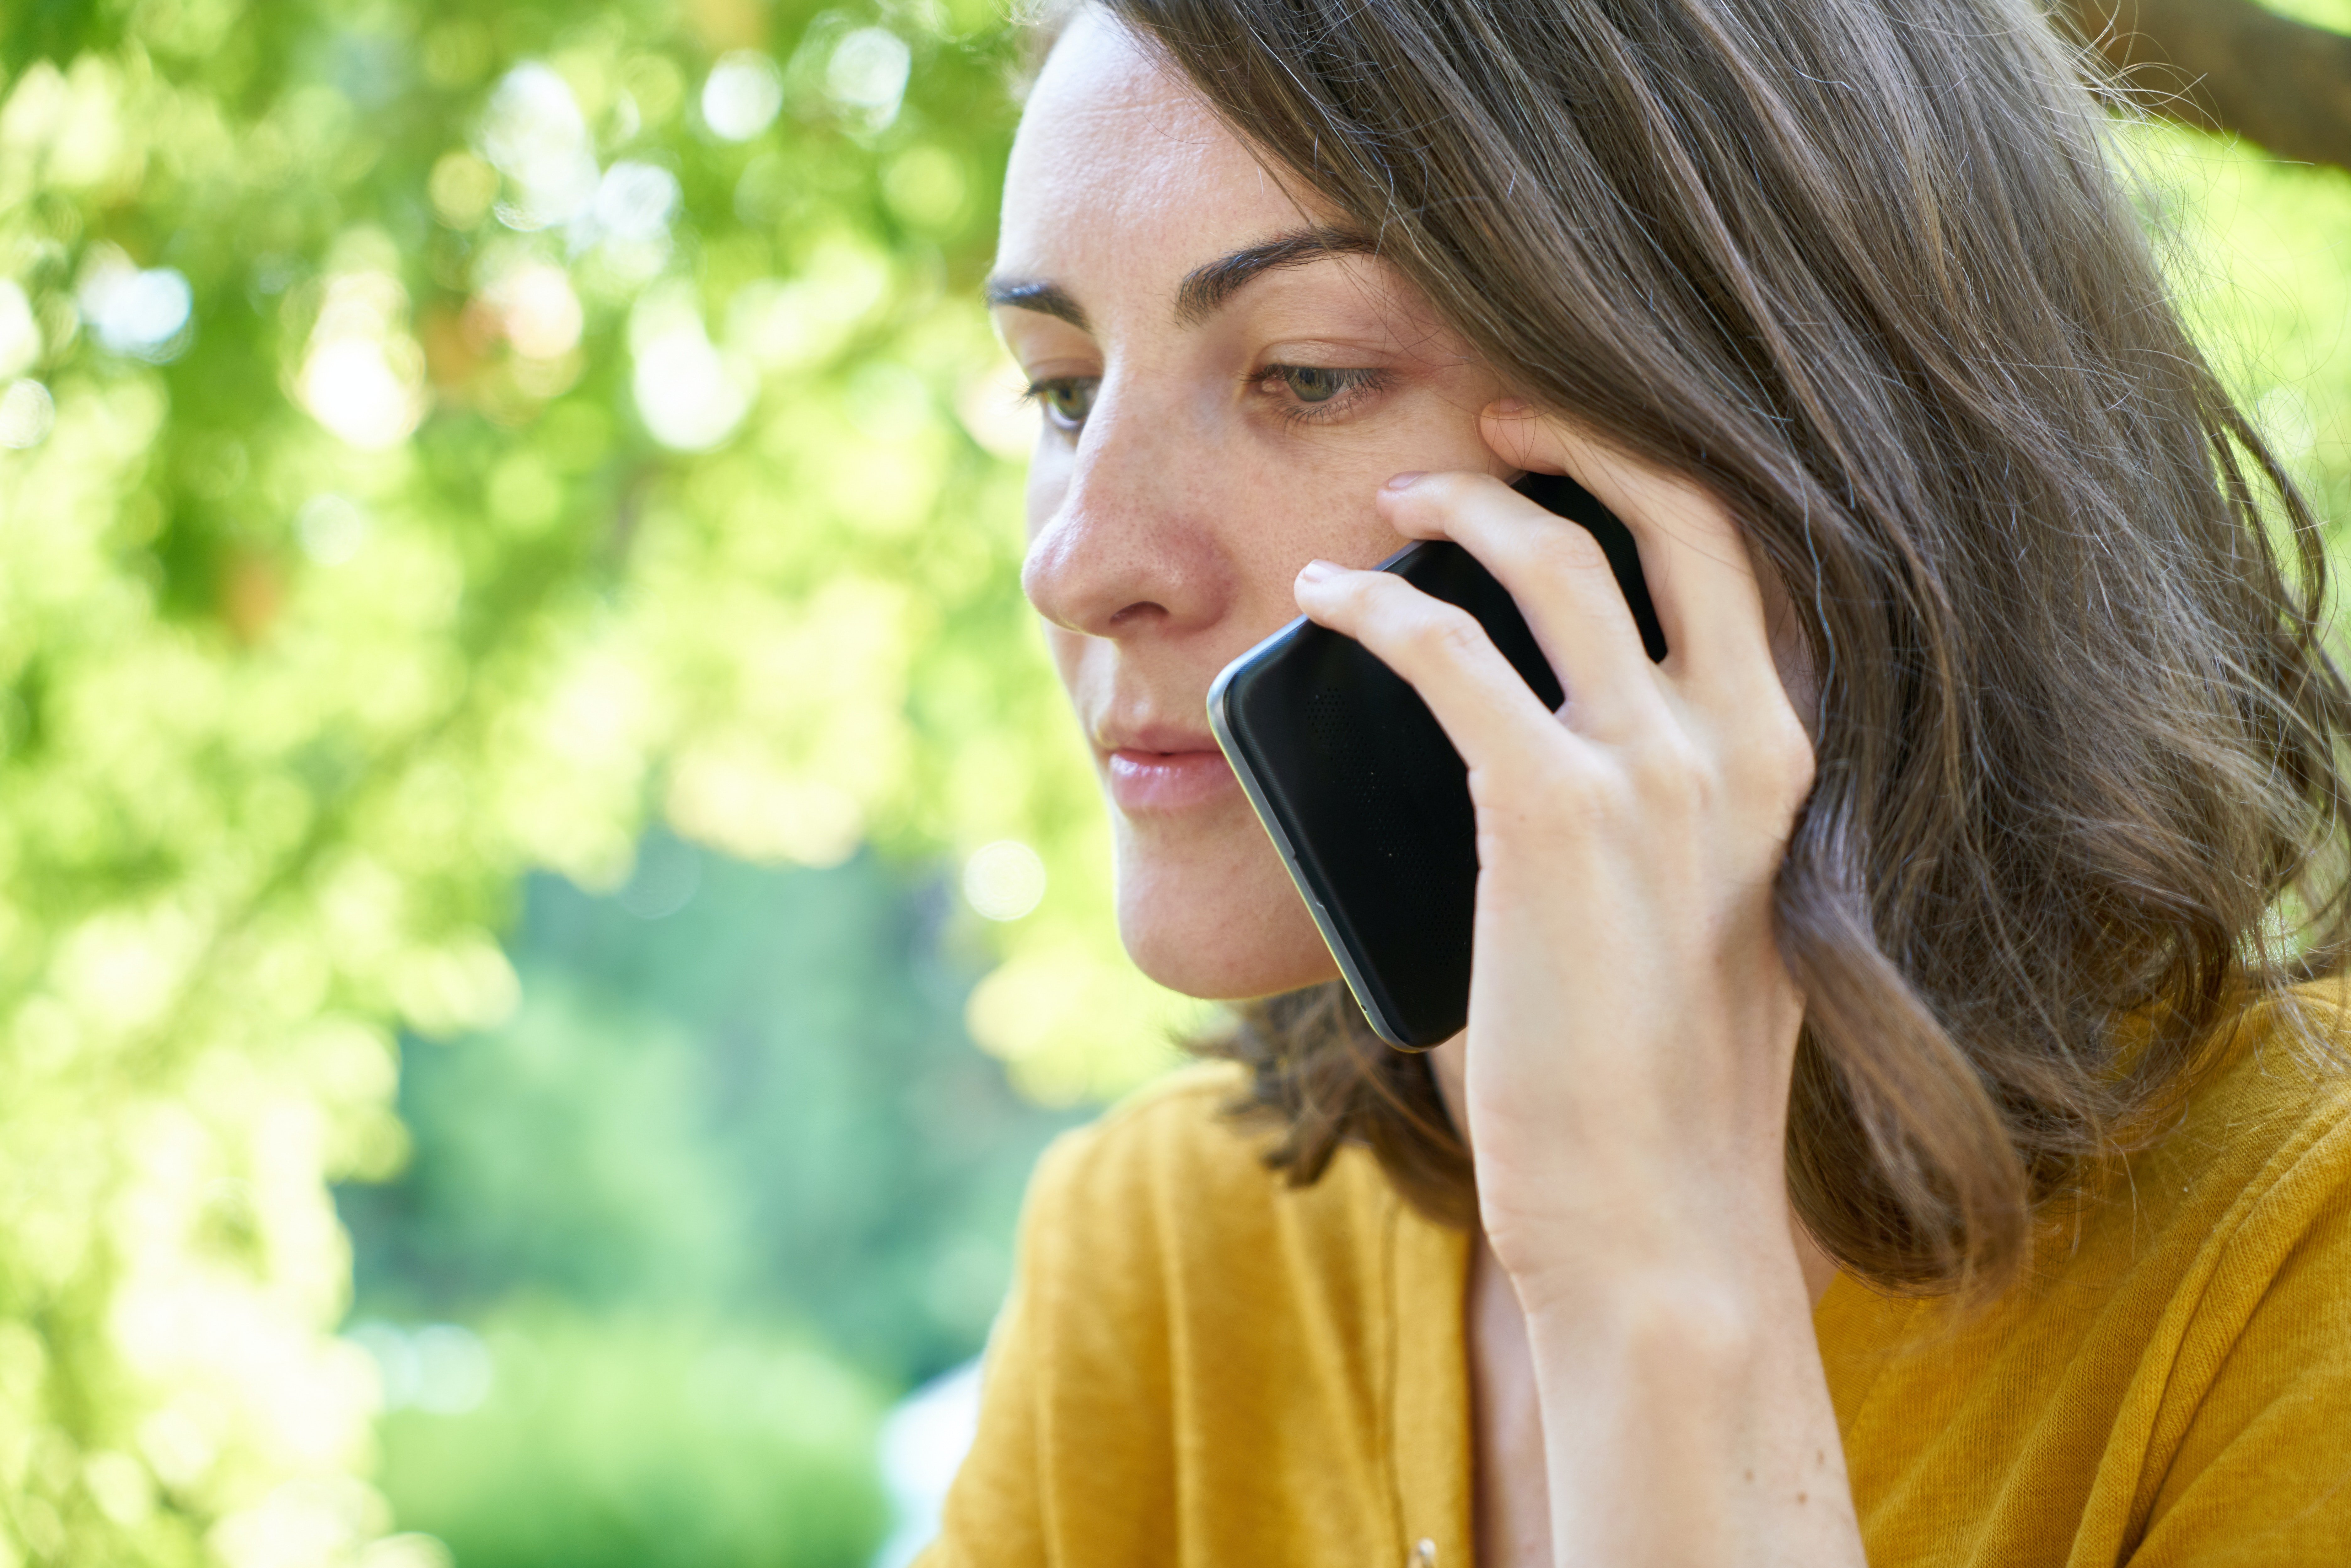 The eldest daughter hung up on OP & talked to her in private | Source: Pexels